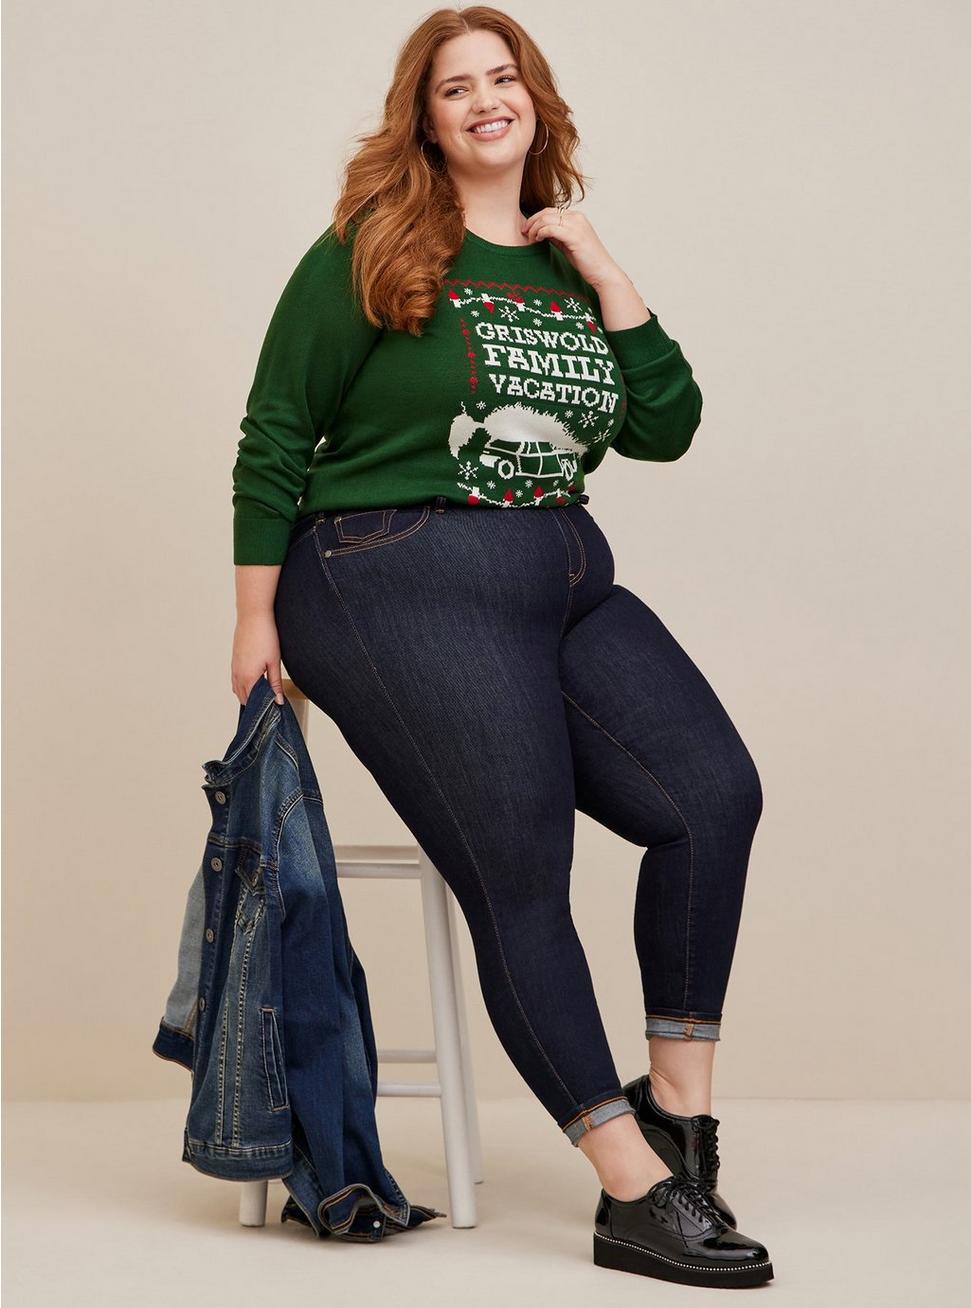 Plus Size Warner Bros. Christmas Vacation Jacquard Pullover Sweater, GREEN, hi-res